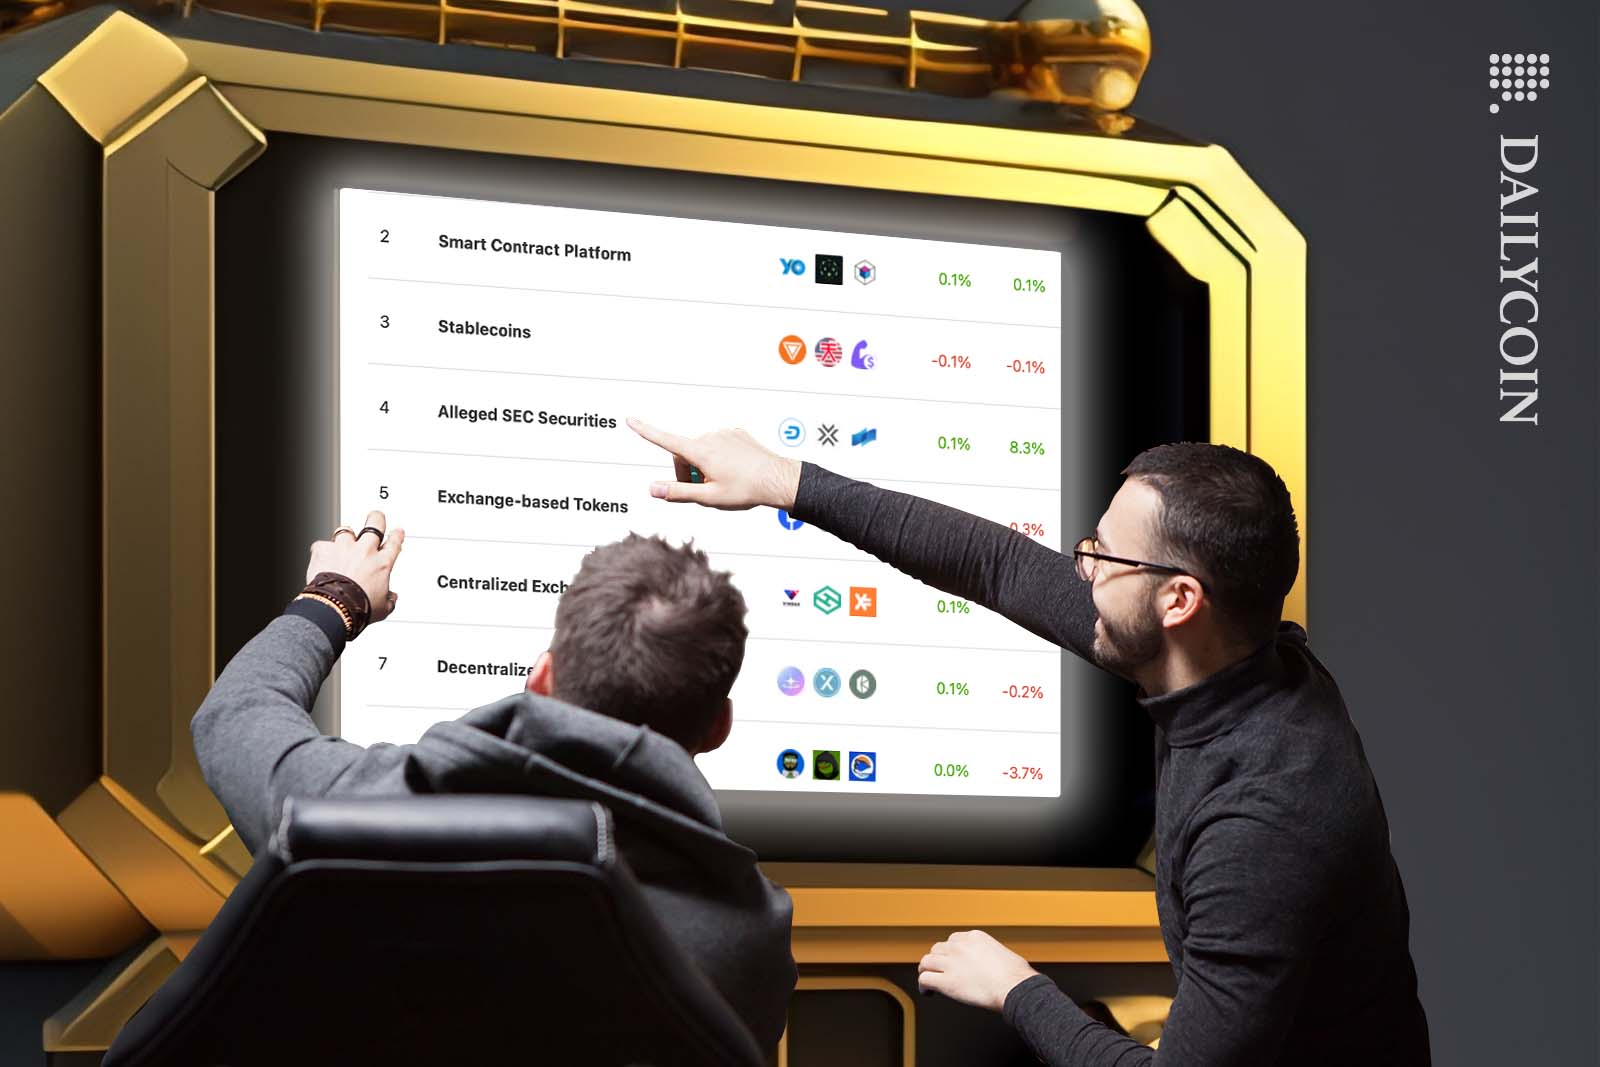 Two man pointing at a monitor showing the category "Aledged SEC Securities".